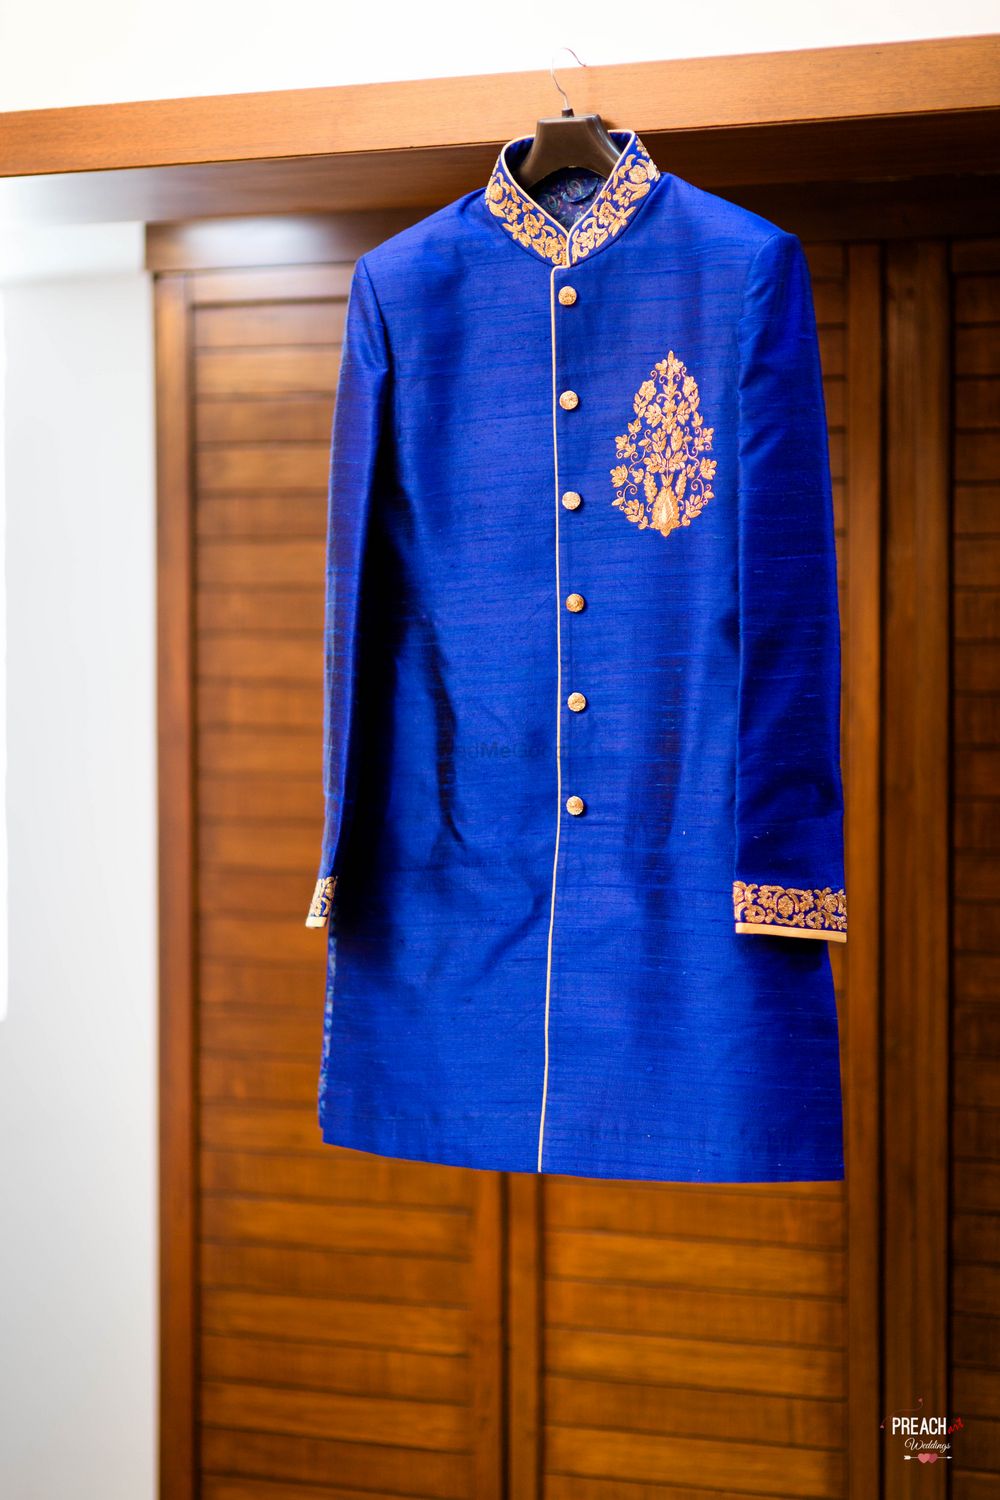 Photo of Royal Blue Sherwani on Hanger with Gold Embroidery